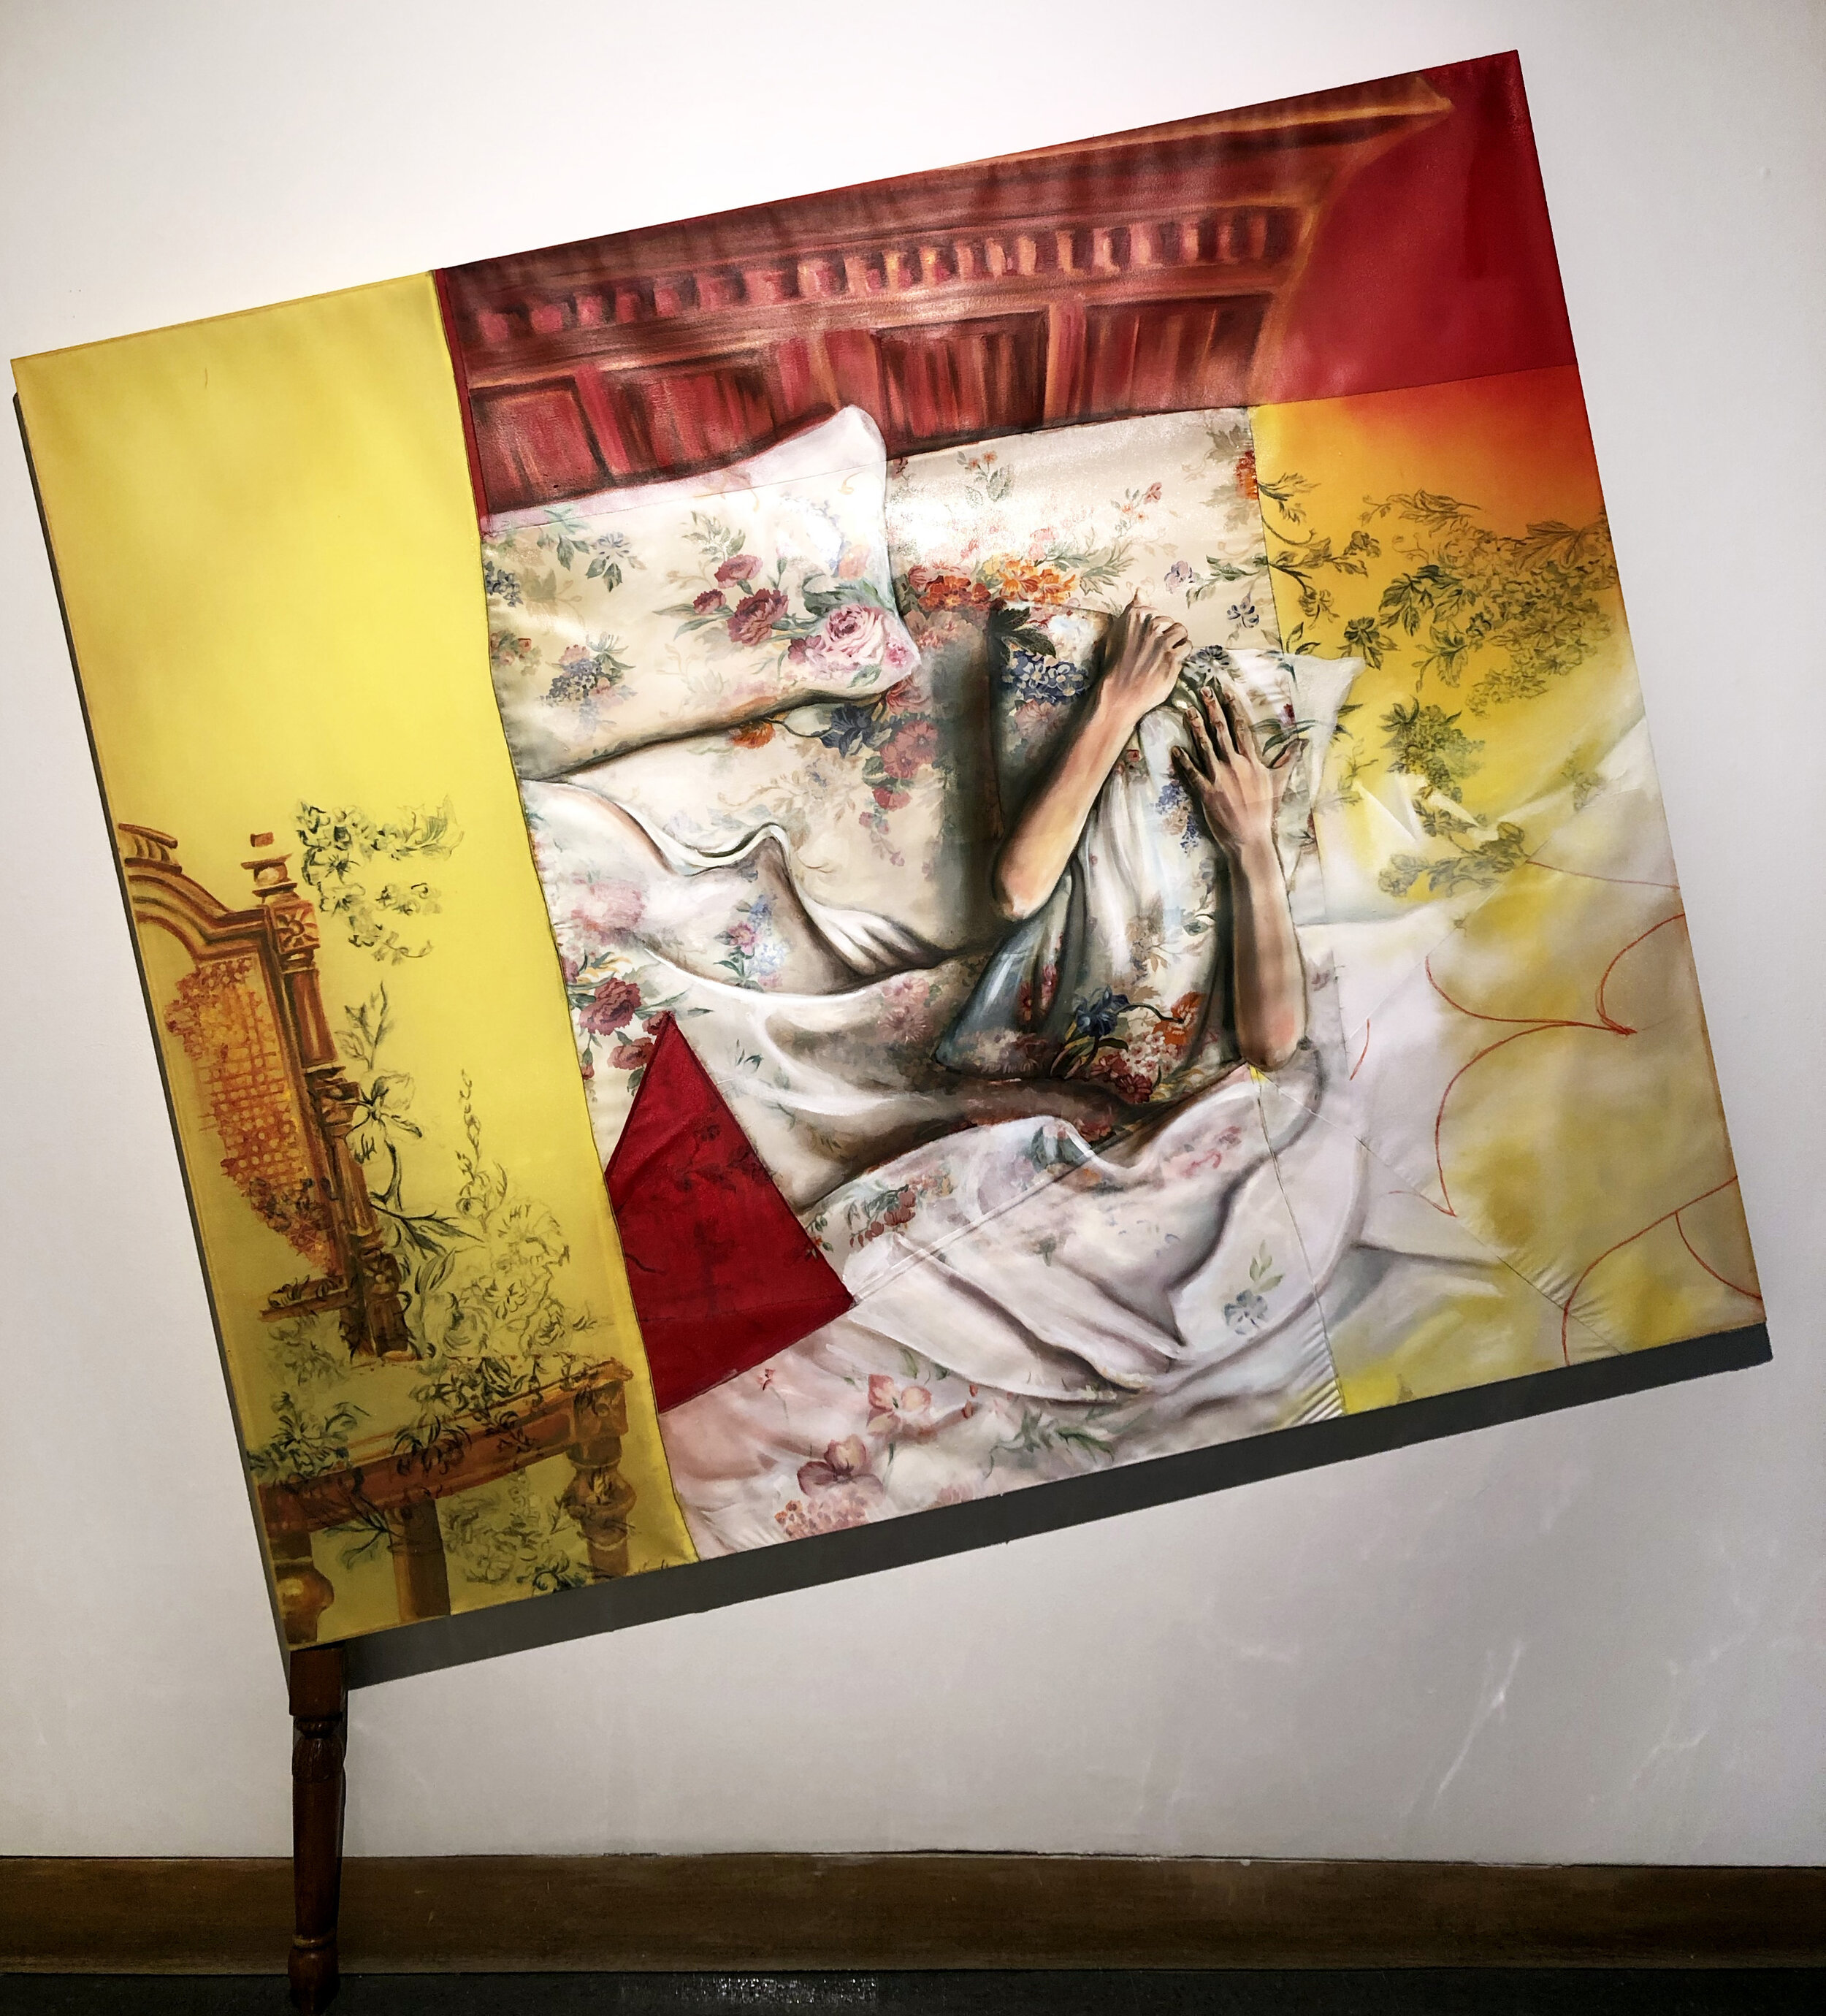 Delusions and Hallucinations, 2019. Resin, acrylic, oil, wax pencil, sewn fabric, chair leg, 60" x 72"